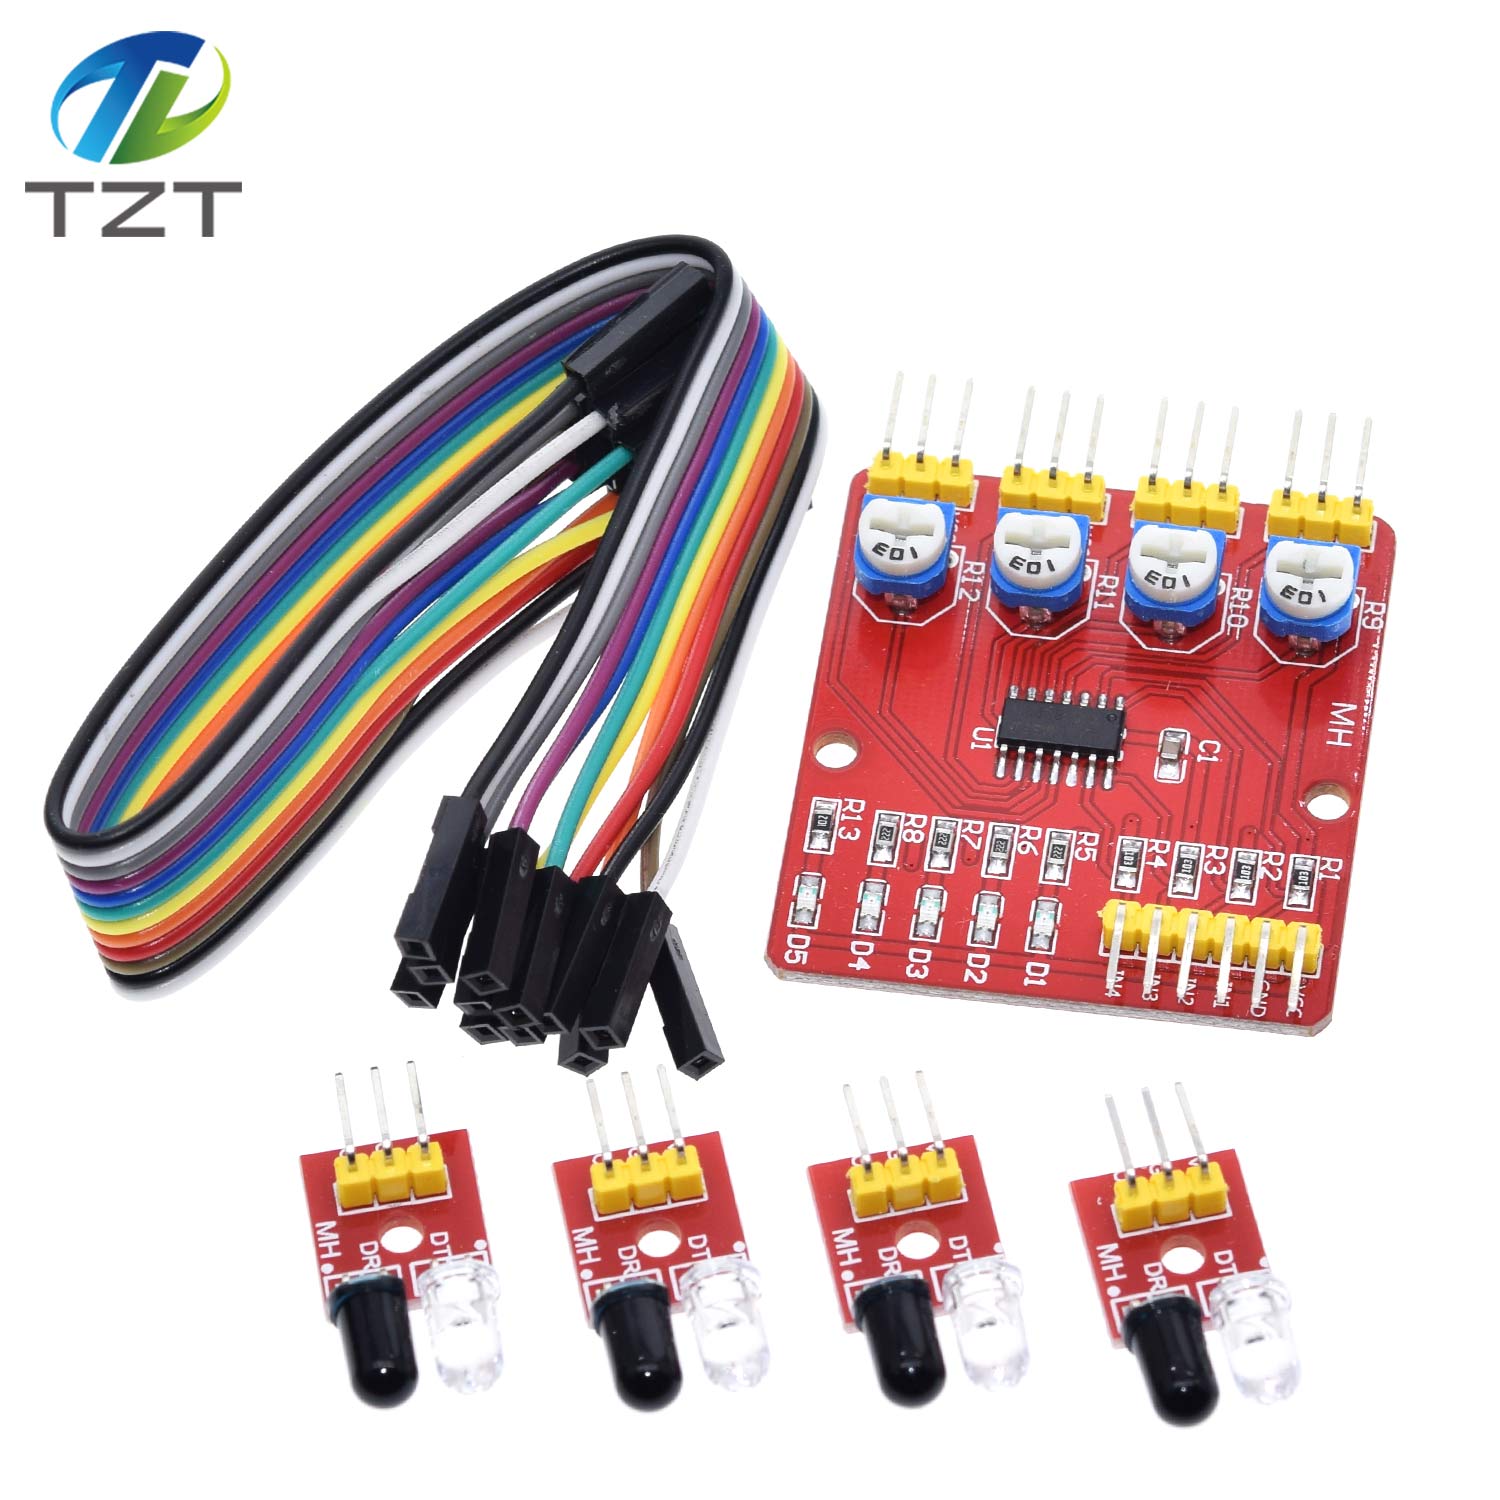 TZT F233-01 Four-way infrared tracing / 4 channel tracking module / transmission line / obstacle avoidance / car / robot sensors